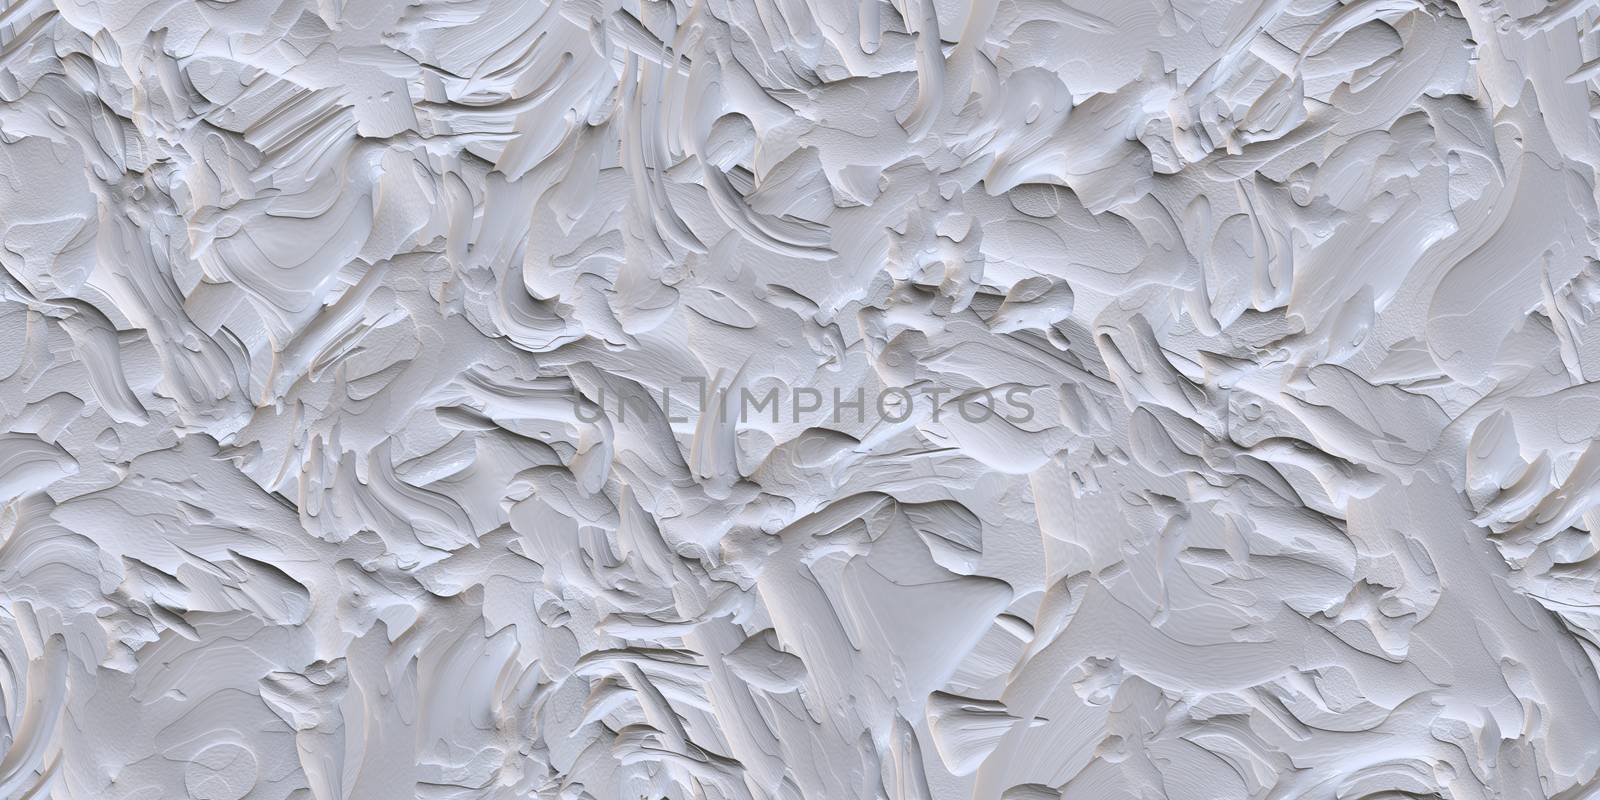 White Seamless Rough Plastering Texture. Stucco Cement Plaster Background. Soft Light Architecture Building Exterior Wall Backdrop.